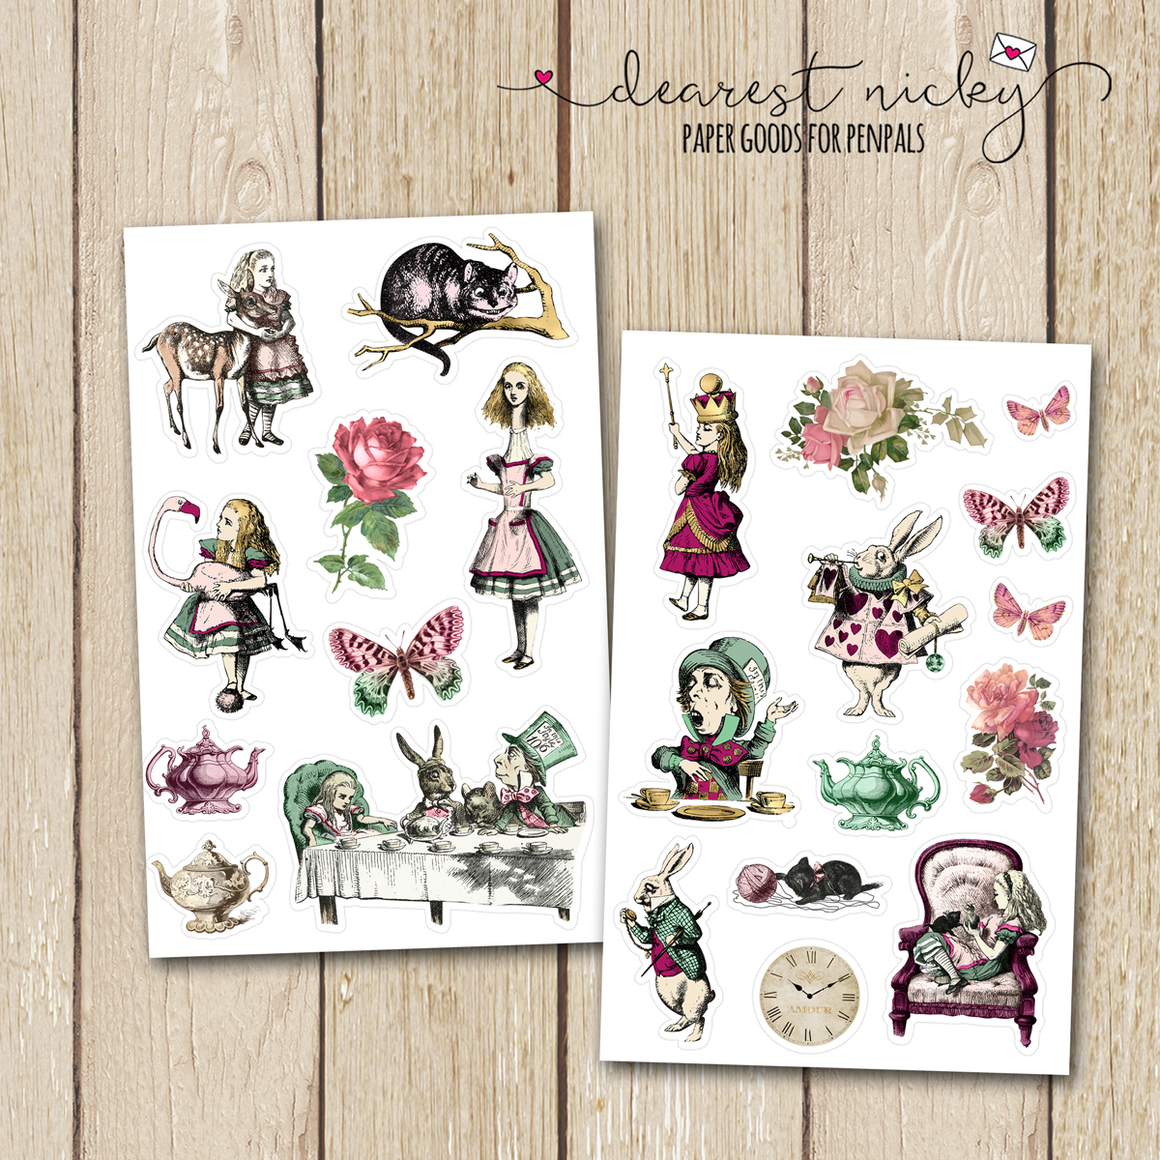 Dearest Nicky stationery sets and paper goods for letter writers.